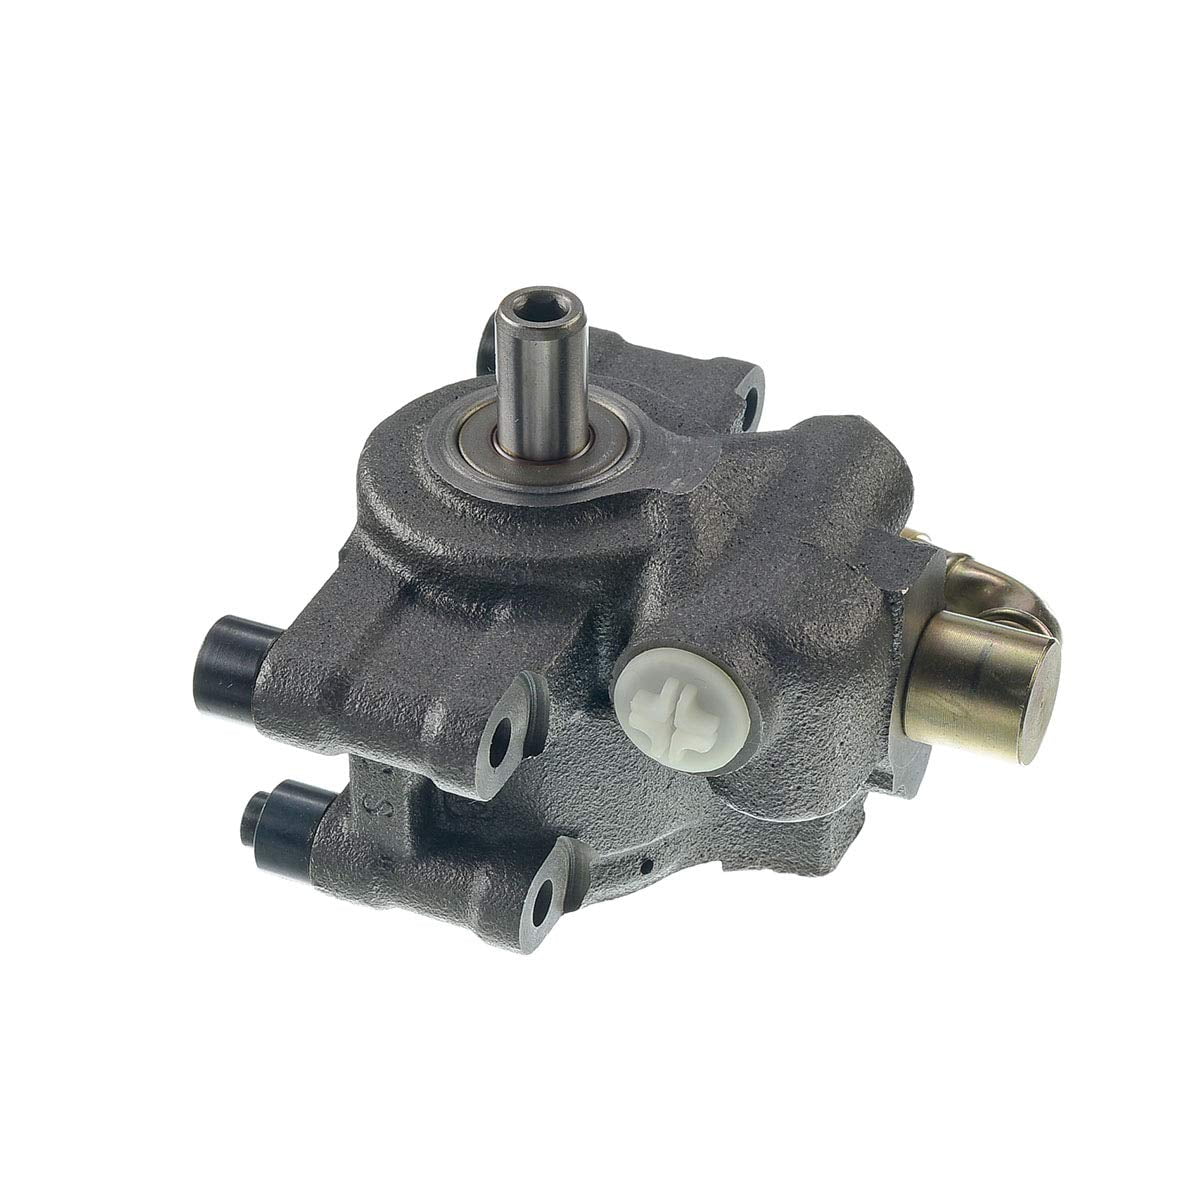 Power Steering Pump for Ford Expedition Lincoln Navigator Mercury Grand Marquis